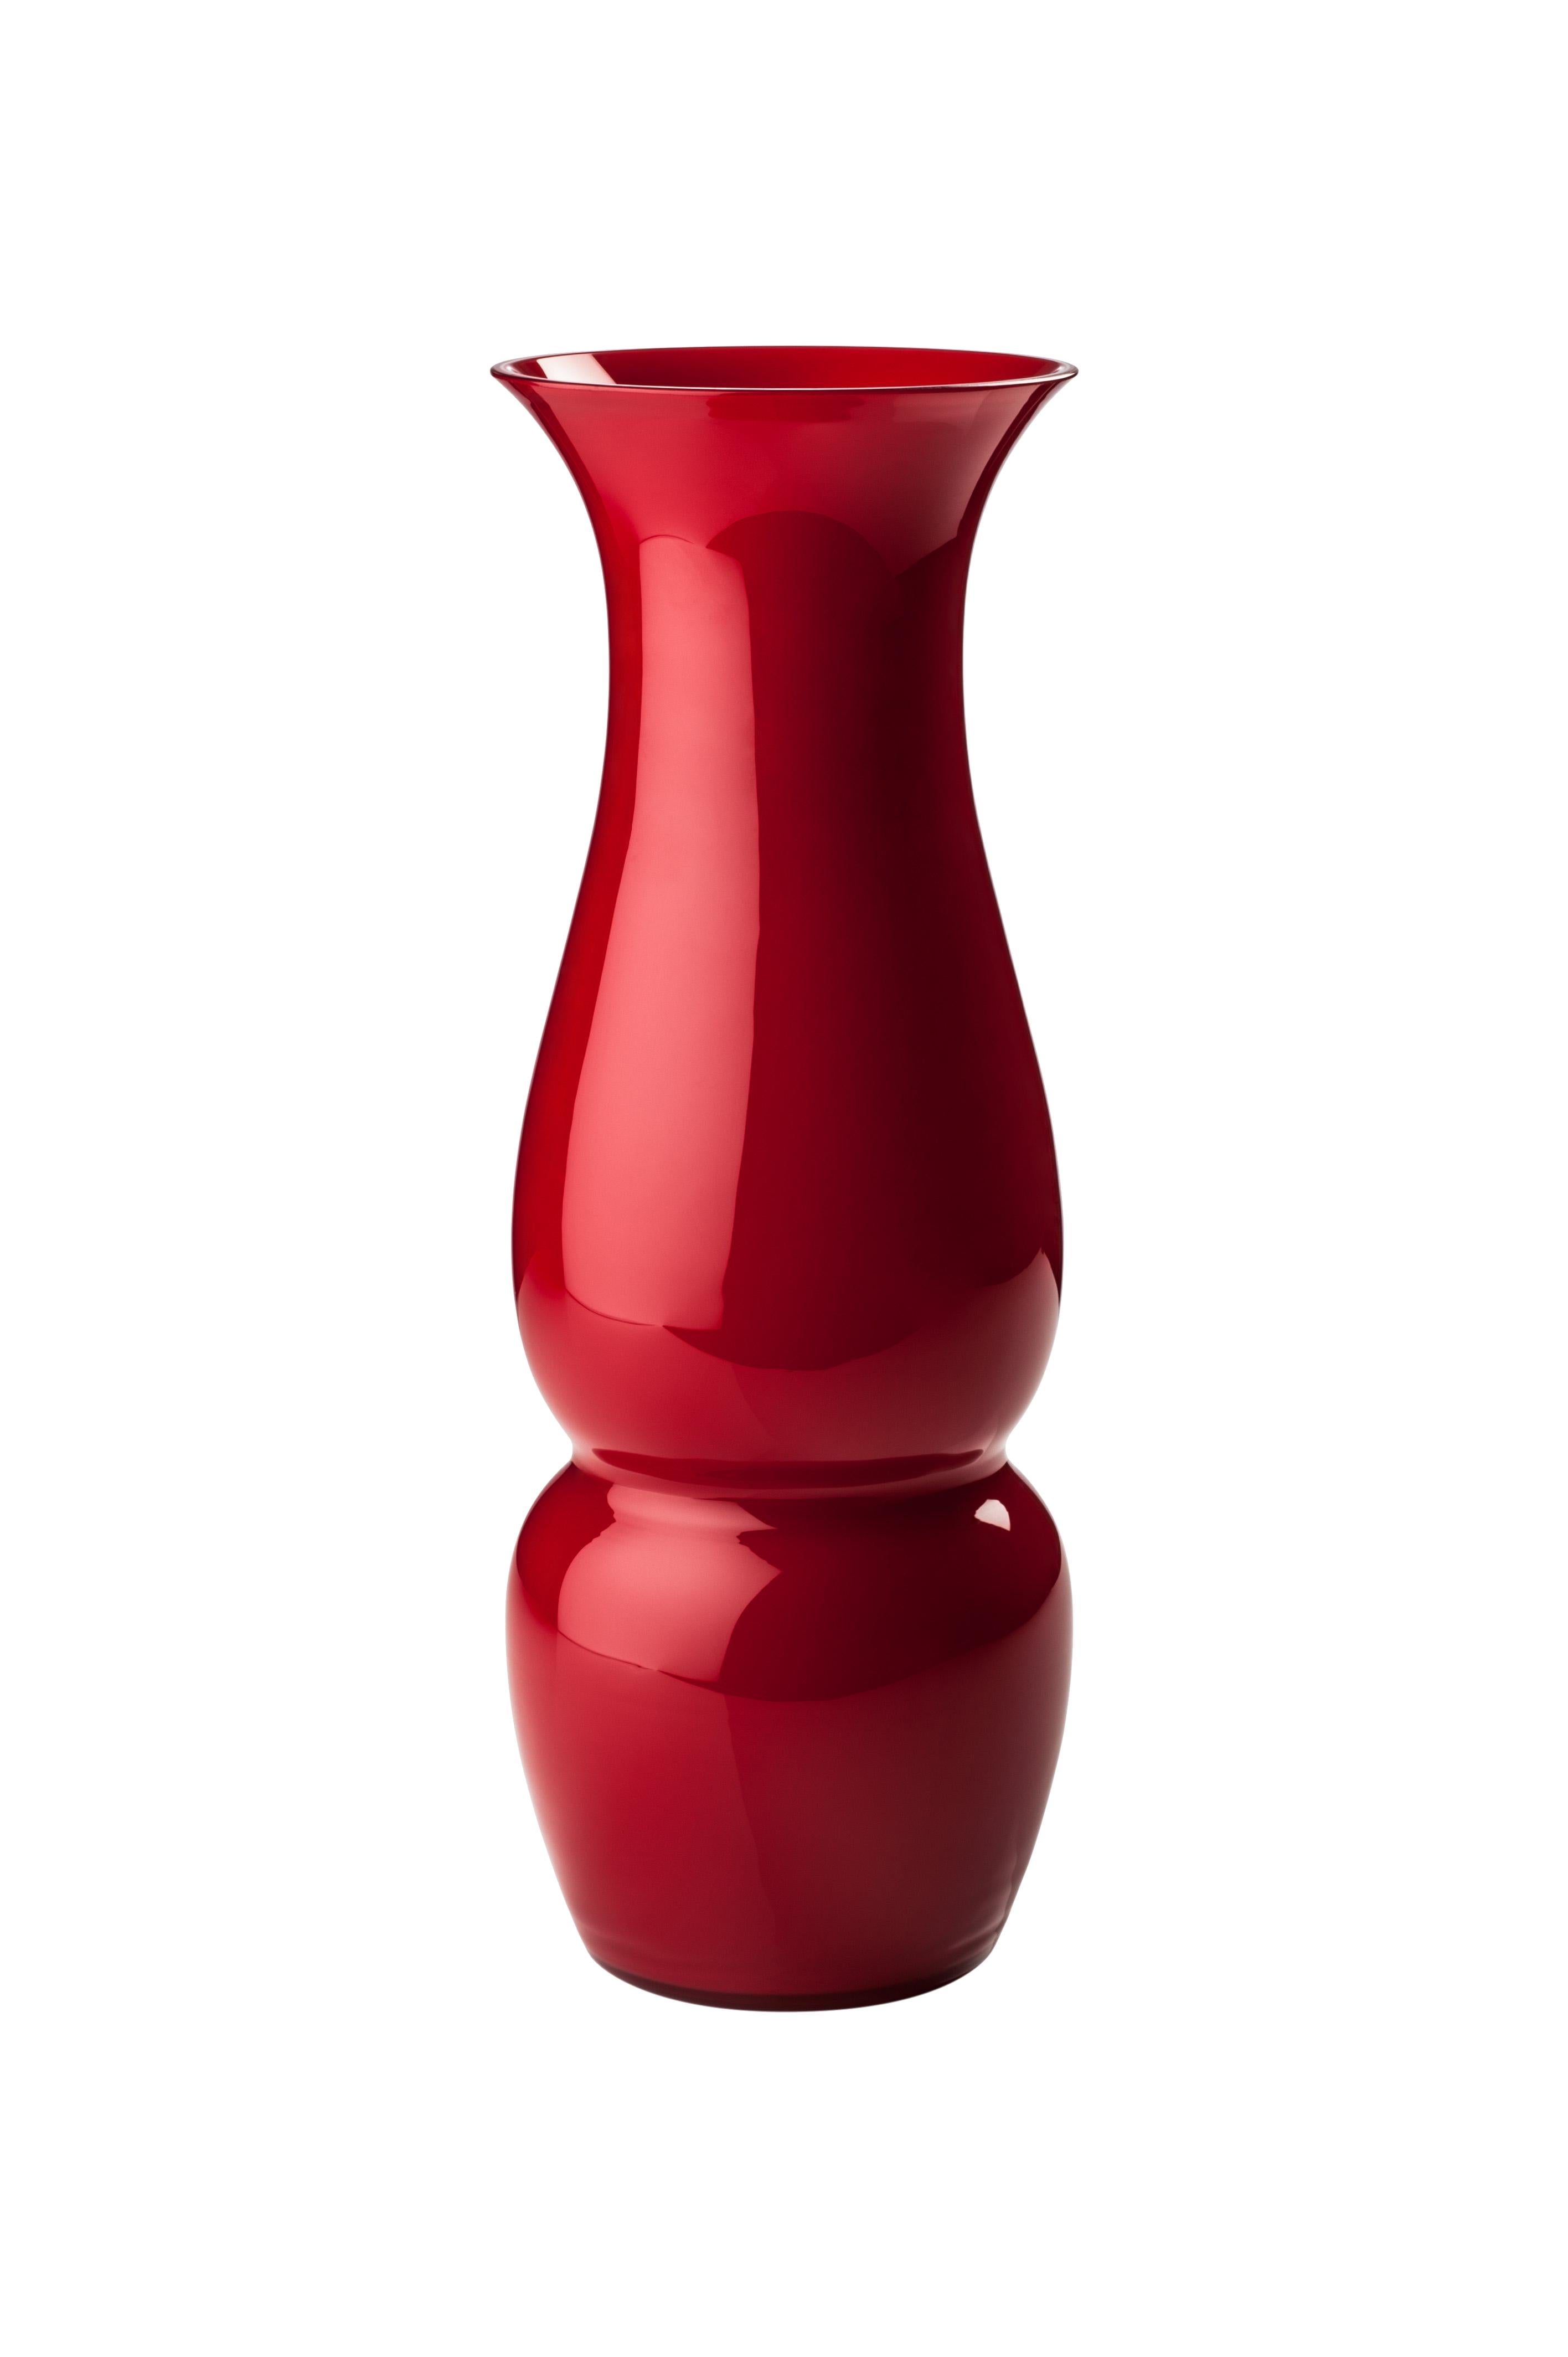 Venini glass vase with elongated body and funnel shaped neck in red designed by Leonardo Lanucci in 2016. Perfect for indoor home decor as container or strong statement piece for any room. Also available in other colors on 1stdibs.

Dimensions: